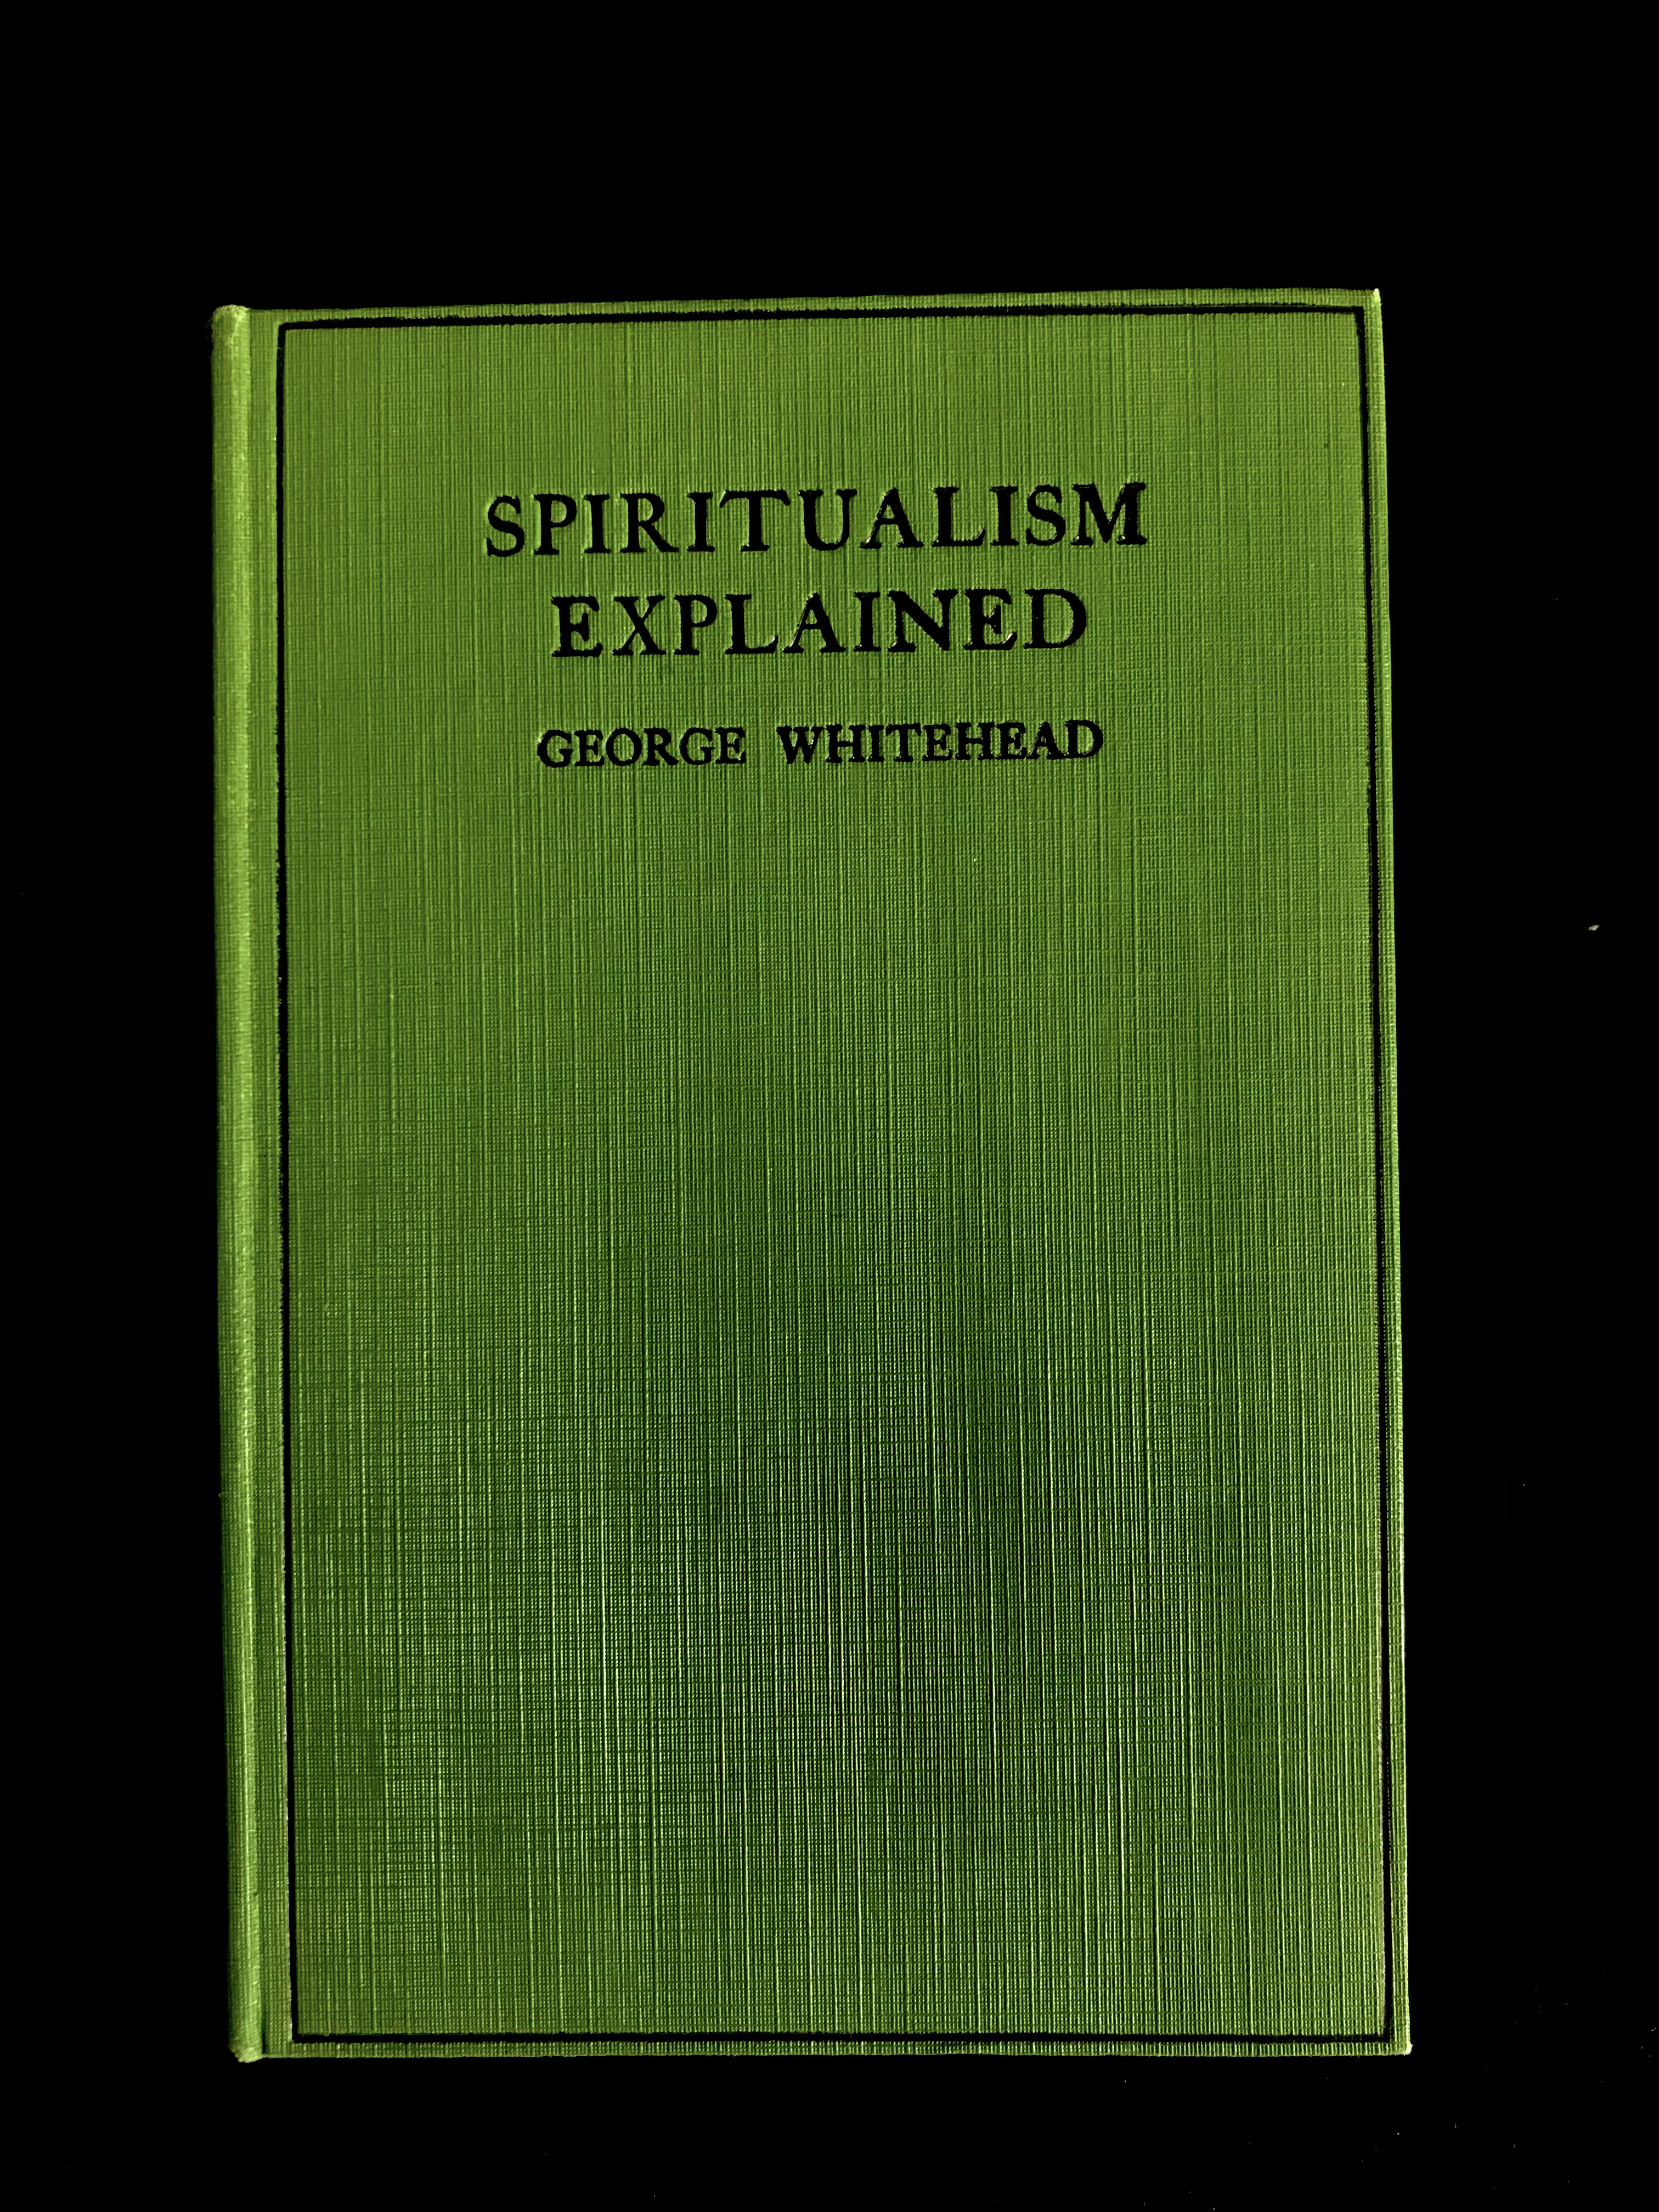 Spiritualism Explained by George Whitehead